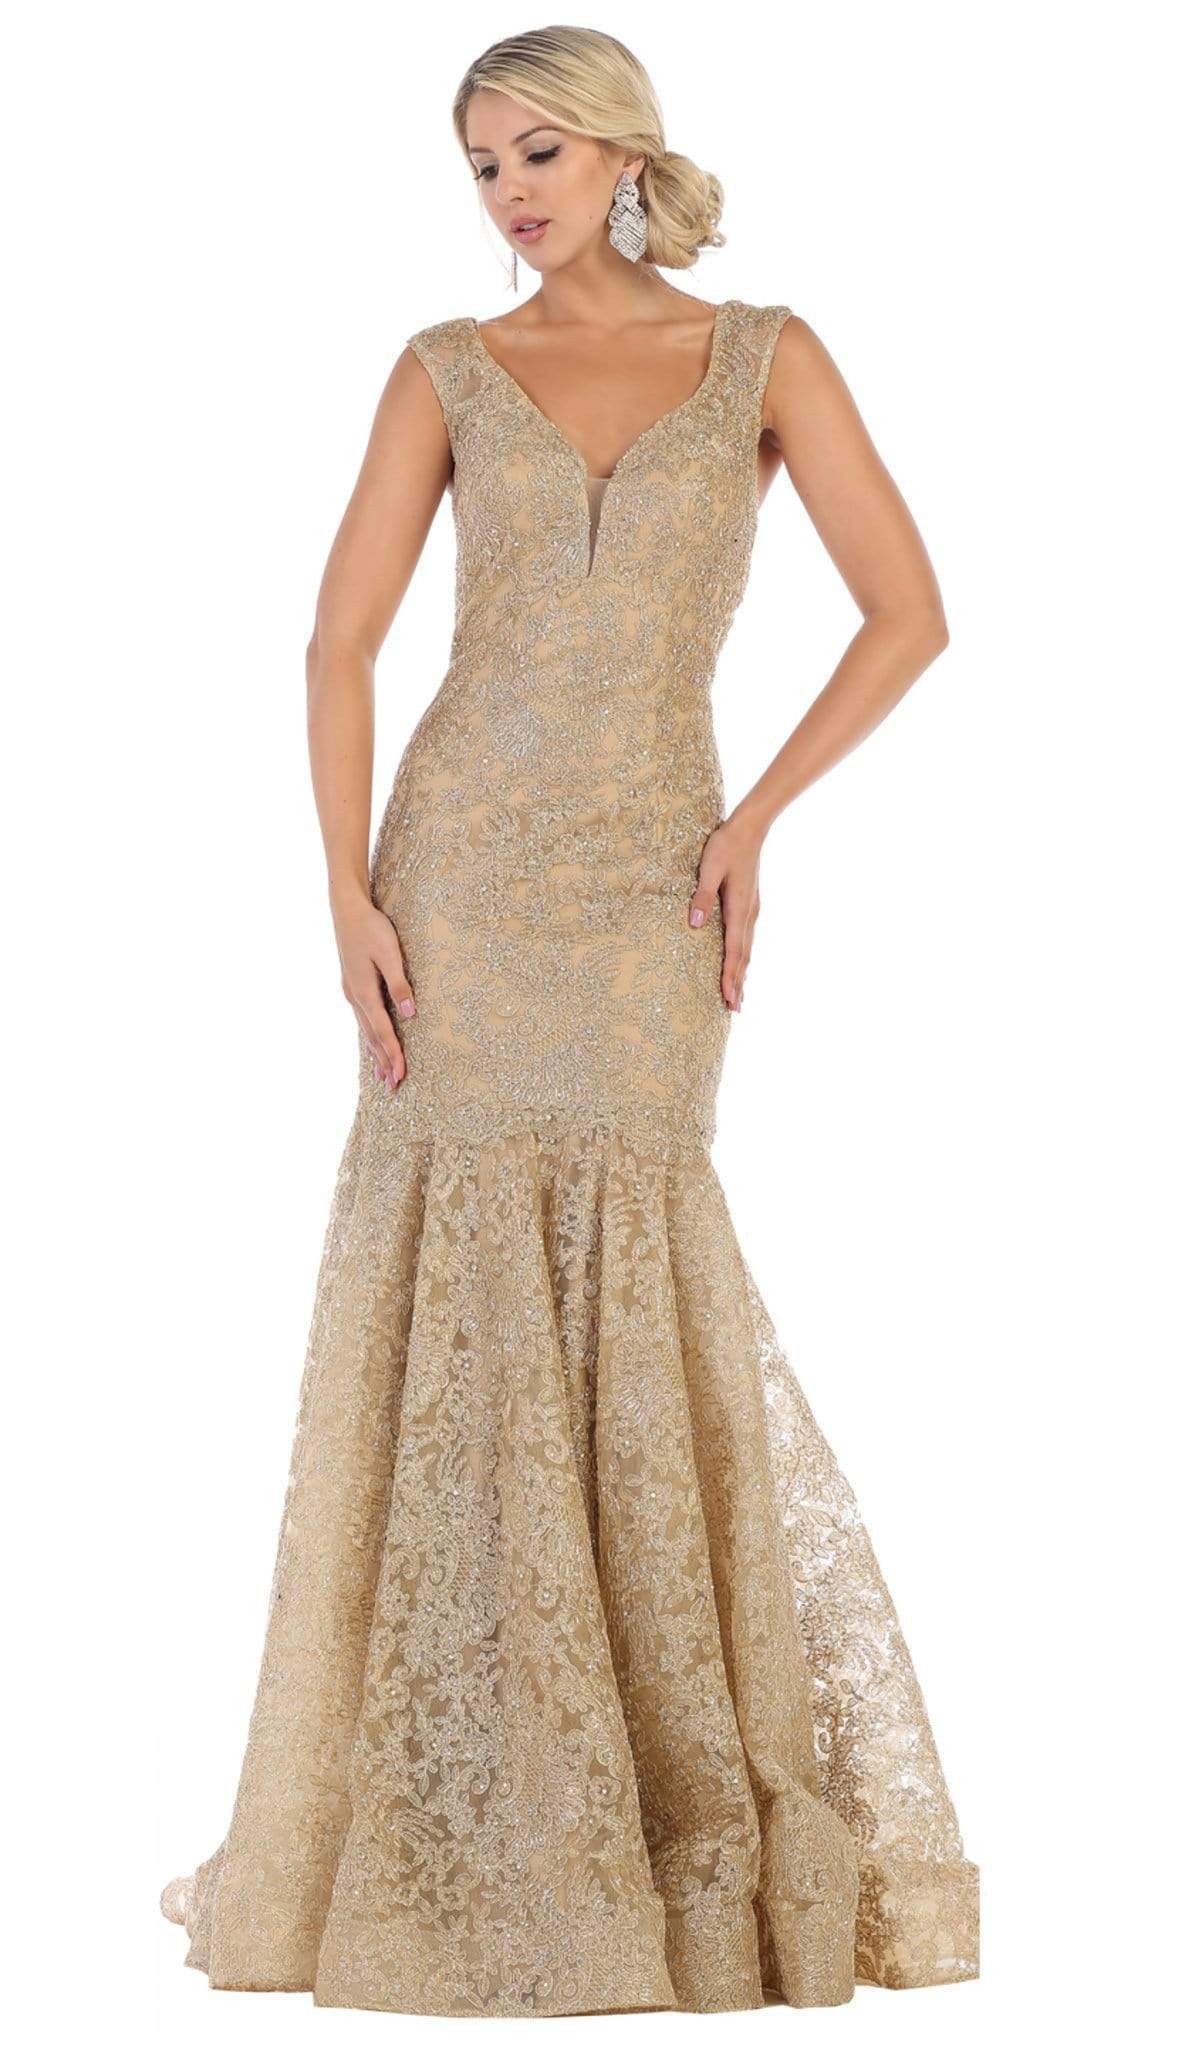 May Queen - RQ7635 Embellished Plunging V-neck Mermaid Dress Special Occasion Dress 2 / Gold